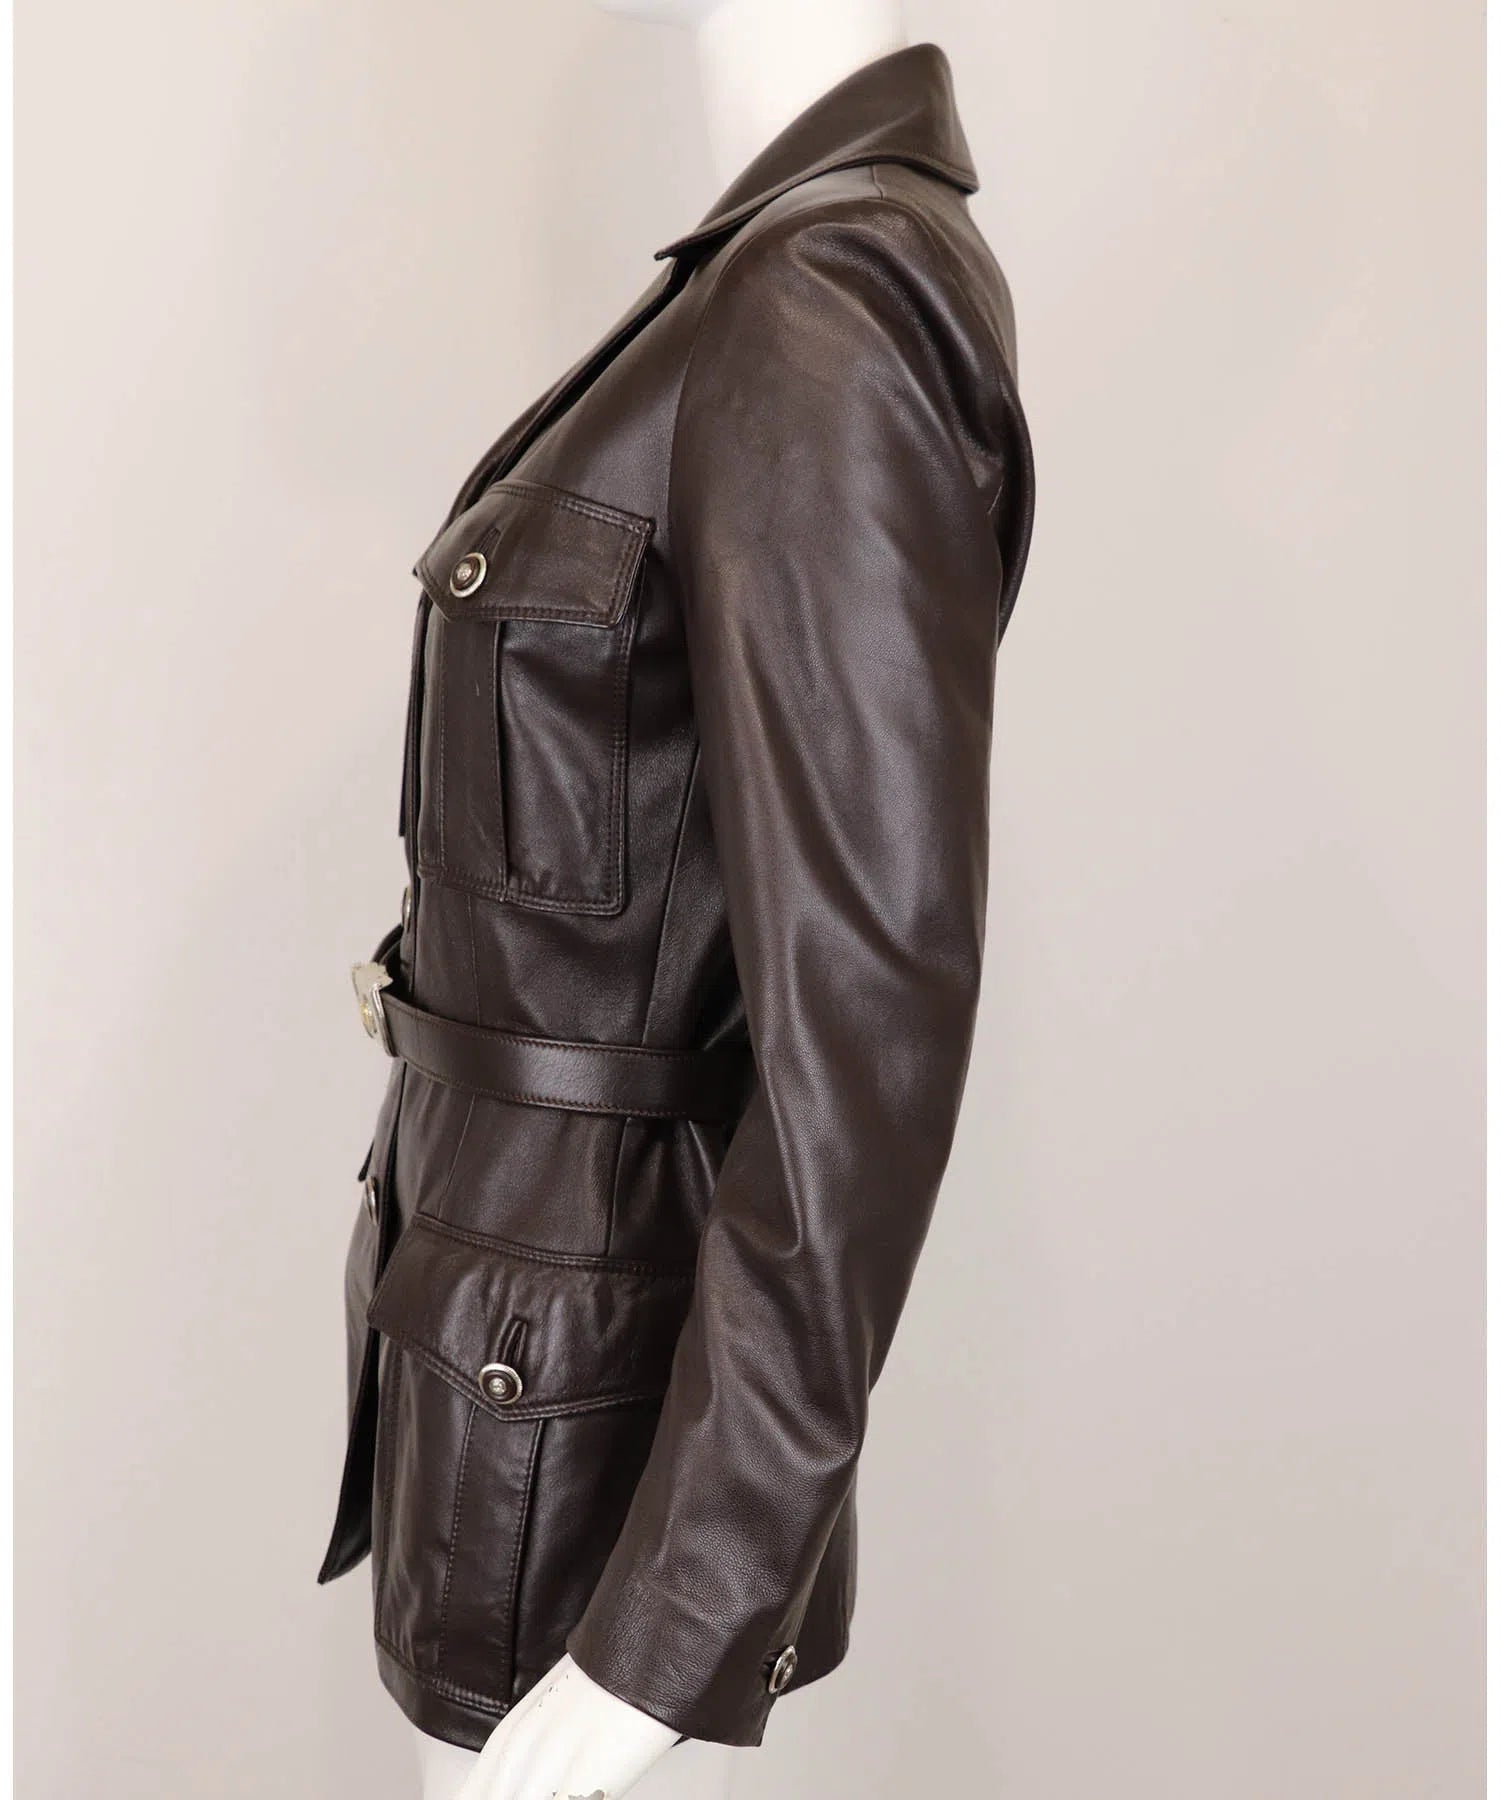 Istante by Versace Leather Jacket - Foxy Couture Carmel